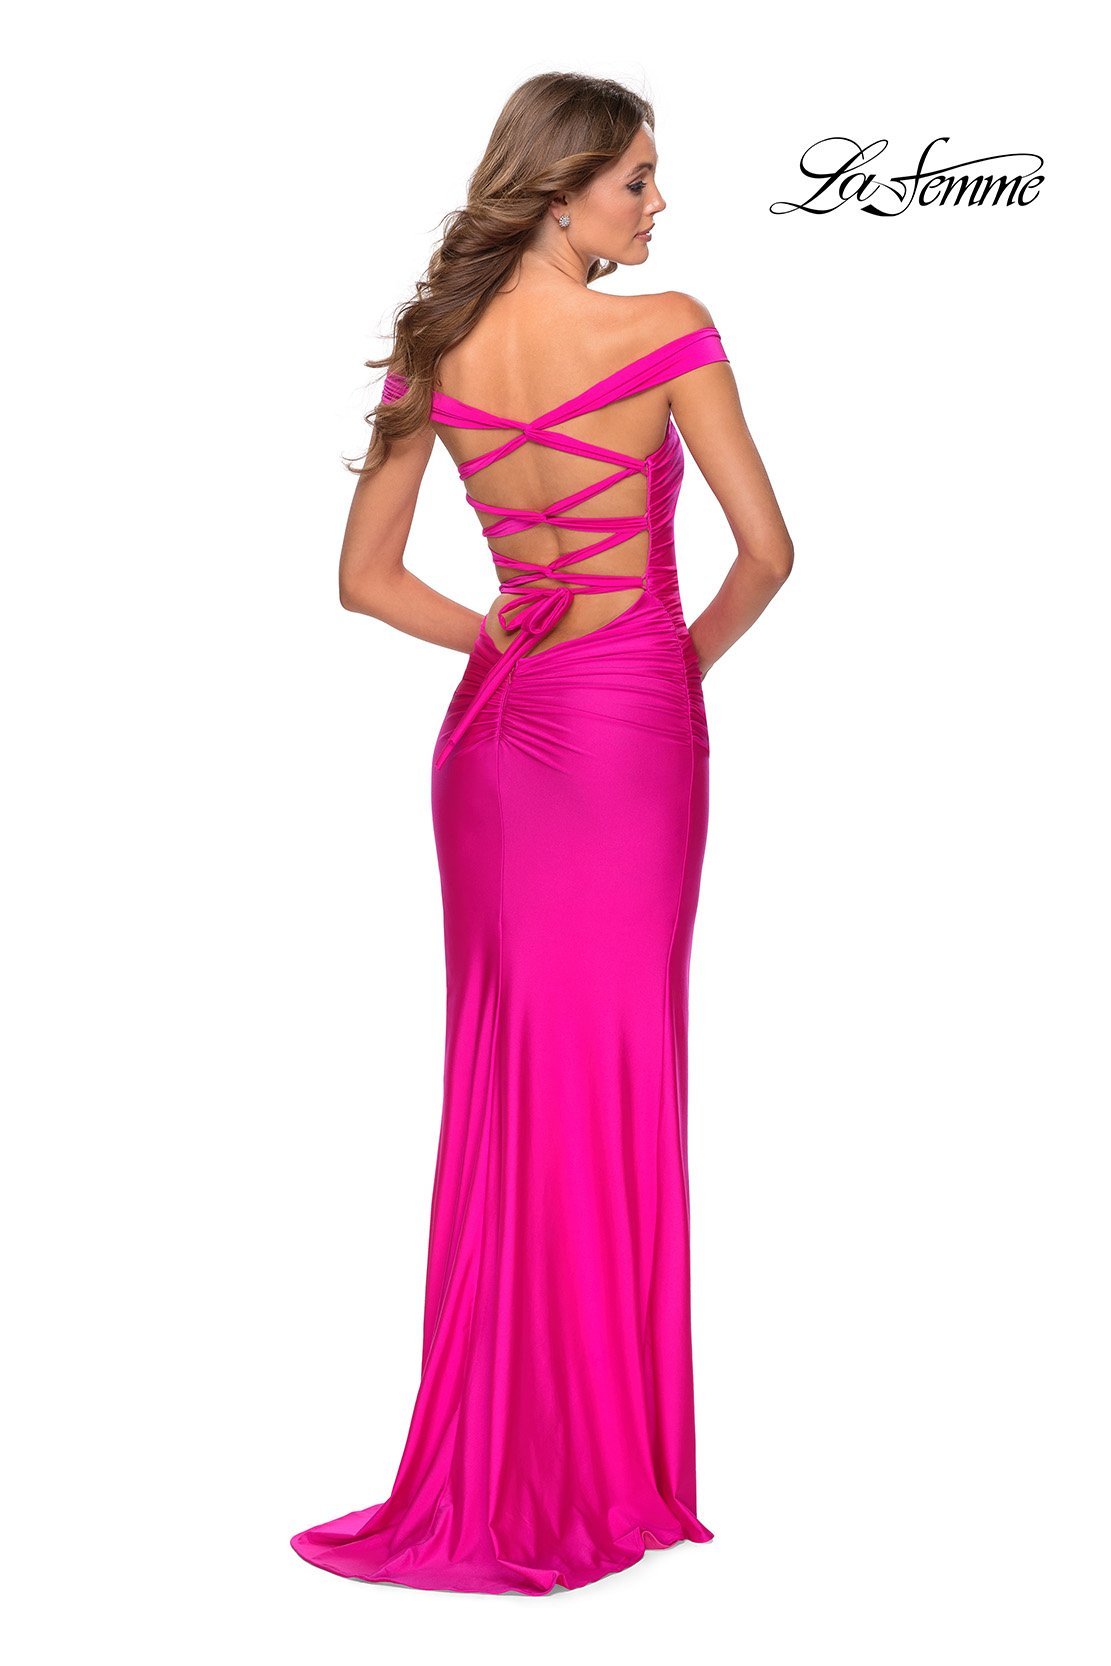 La Femme 28506 dress images in these colors: Black, Dark Berry, Hot Pink, Mauve, Royal Blue, Yellow.